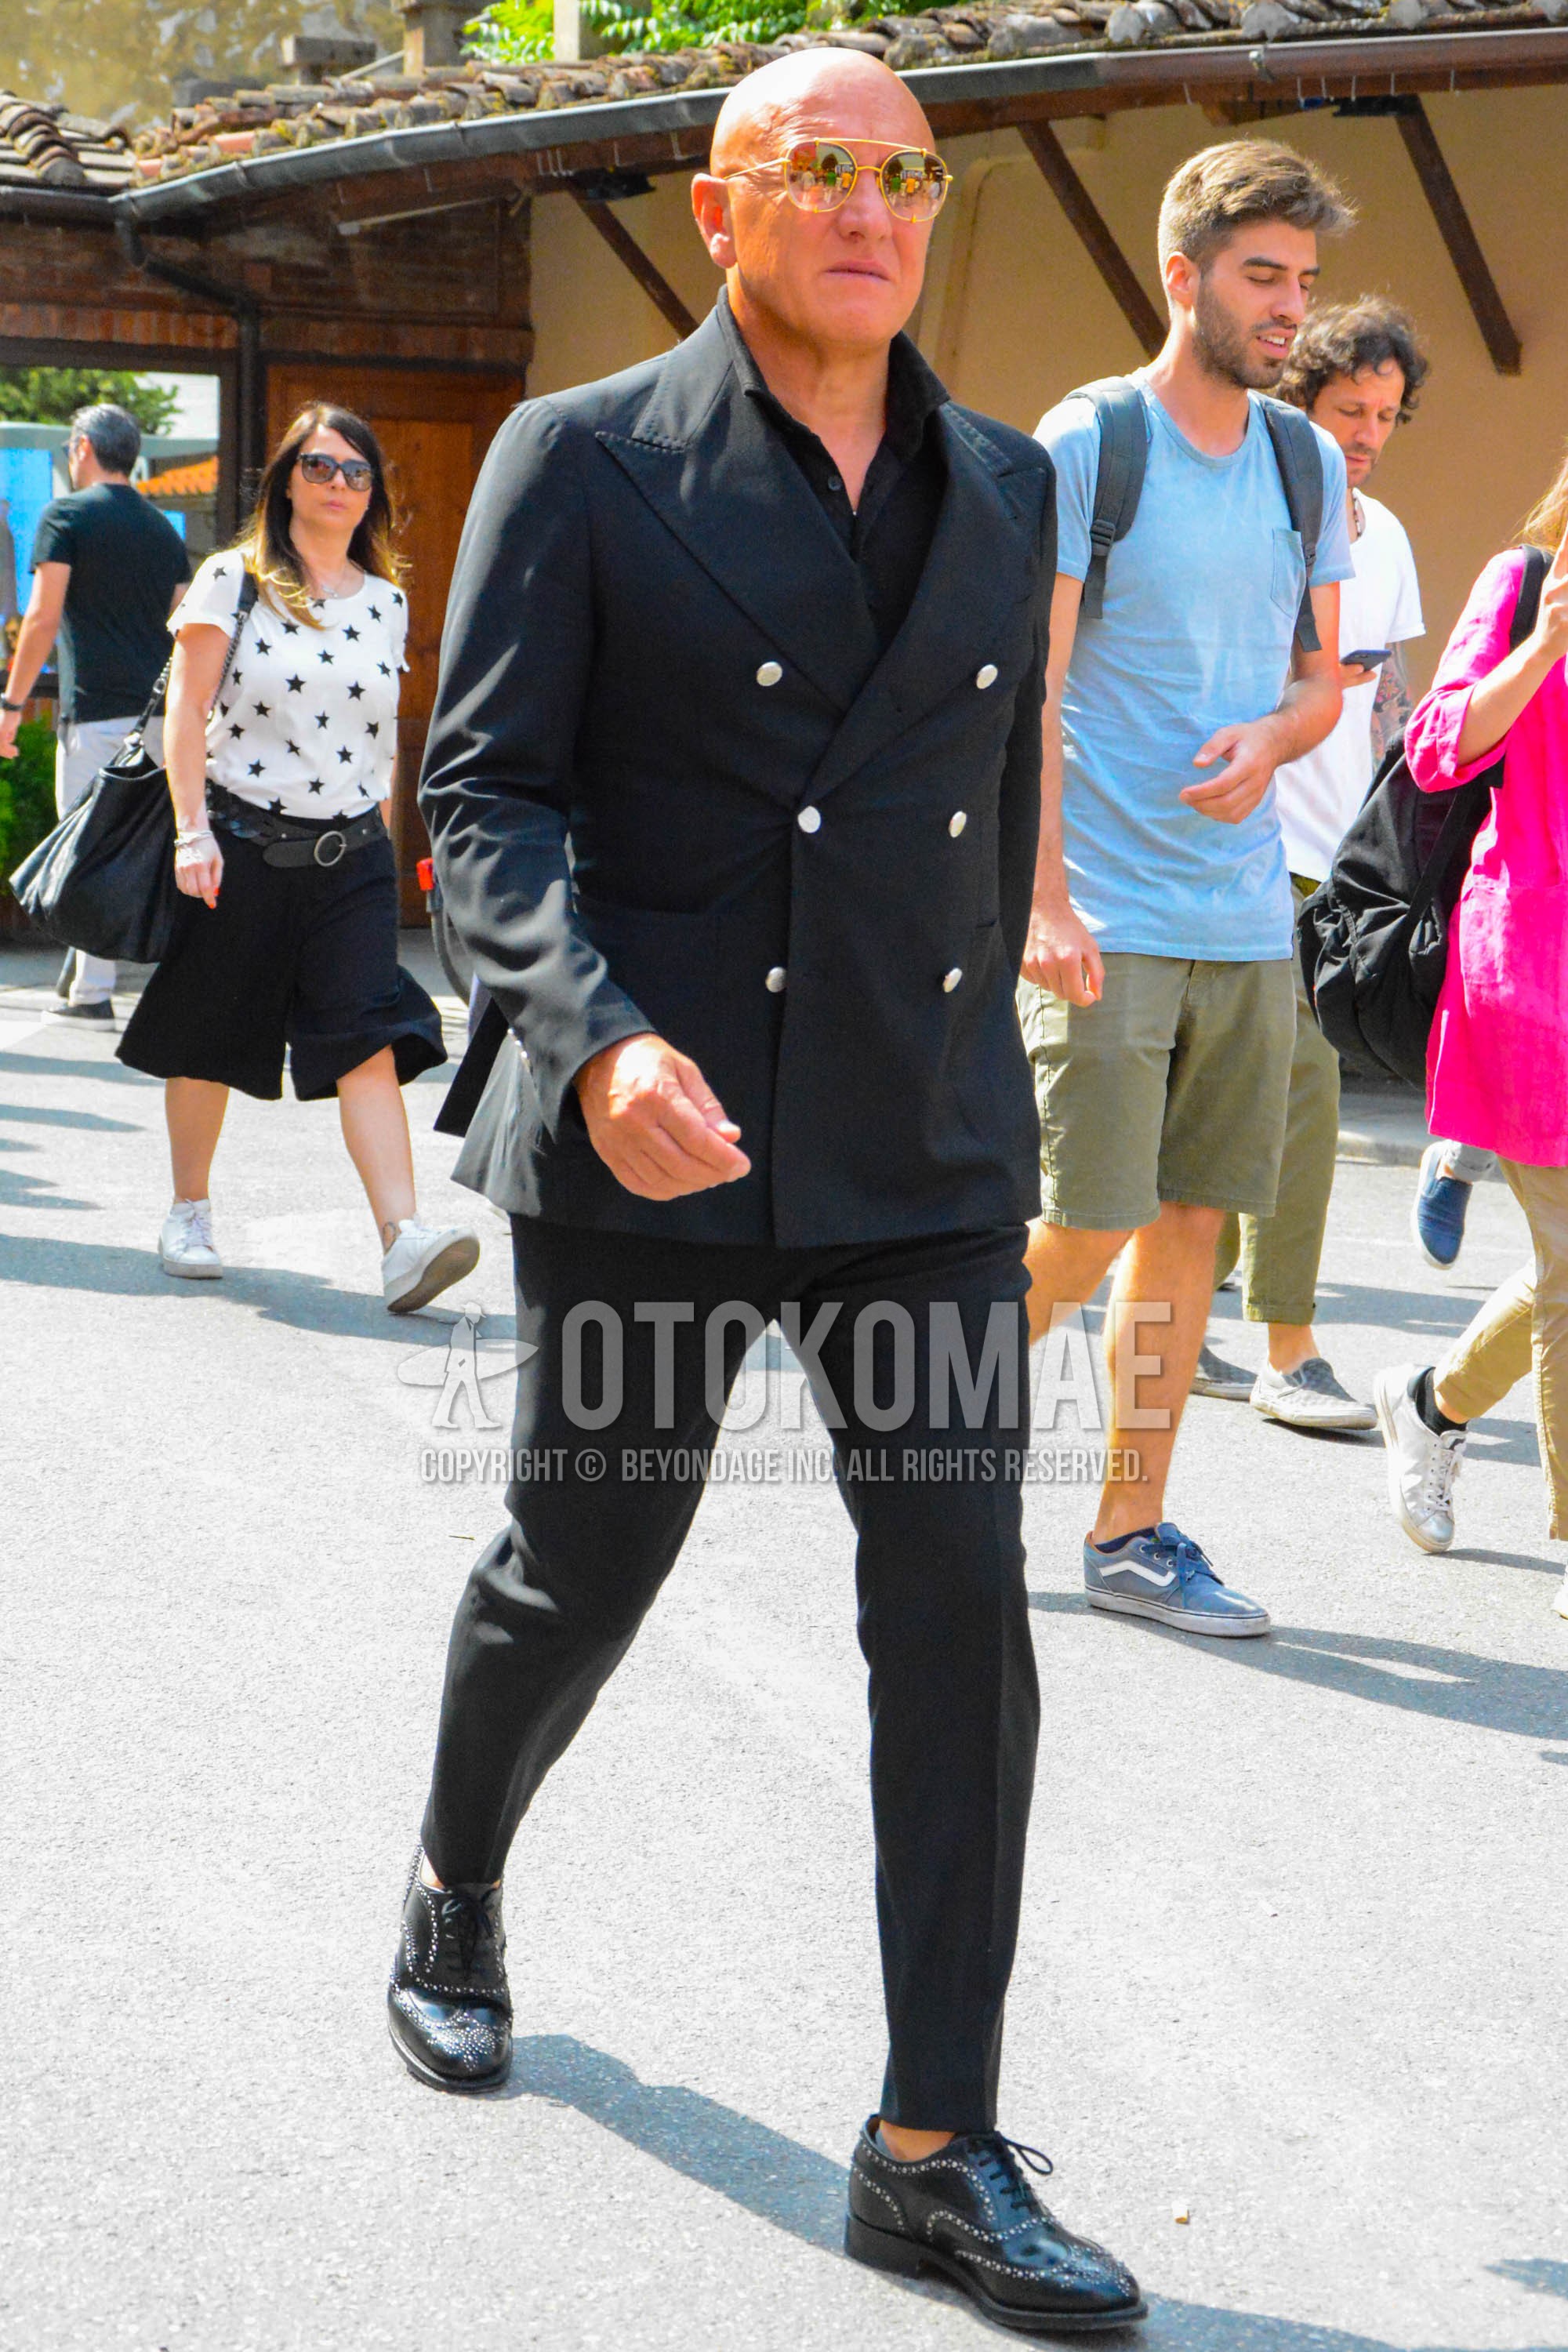 Men's spring summer autumn outfit with gold plain sunglasses, black plain tailored jacket, black plain shirt, black plain slacks, black wing-tip shoes leather shoes.